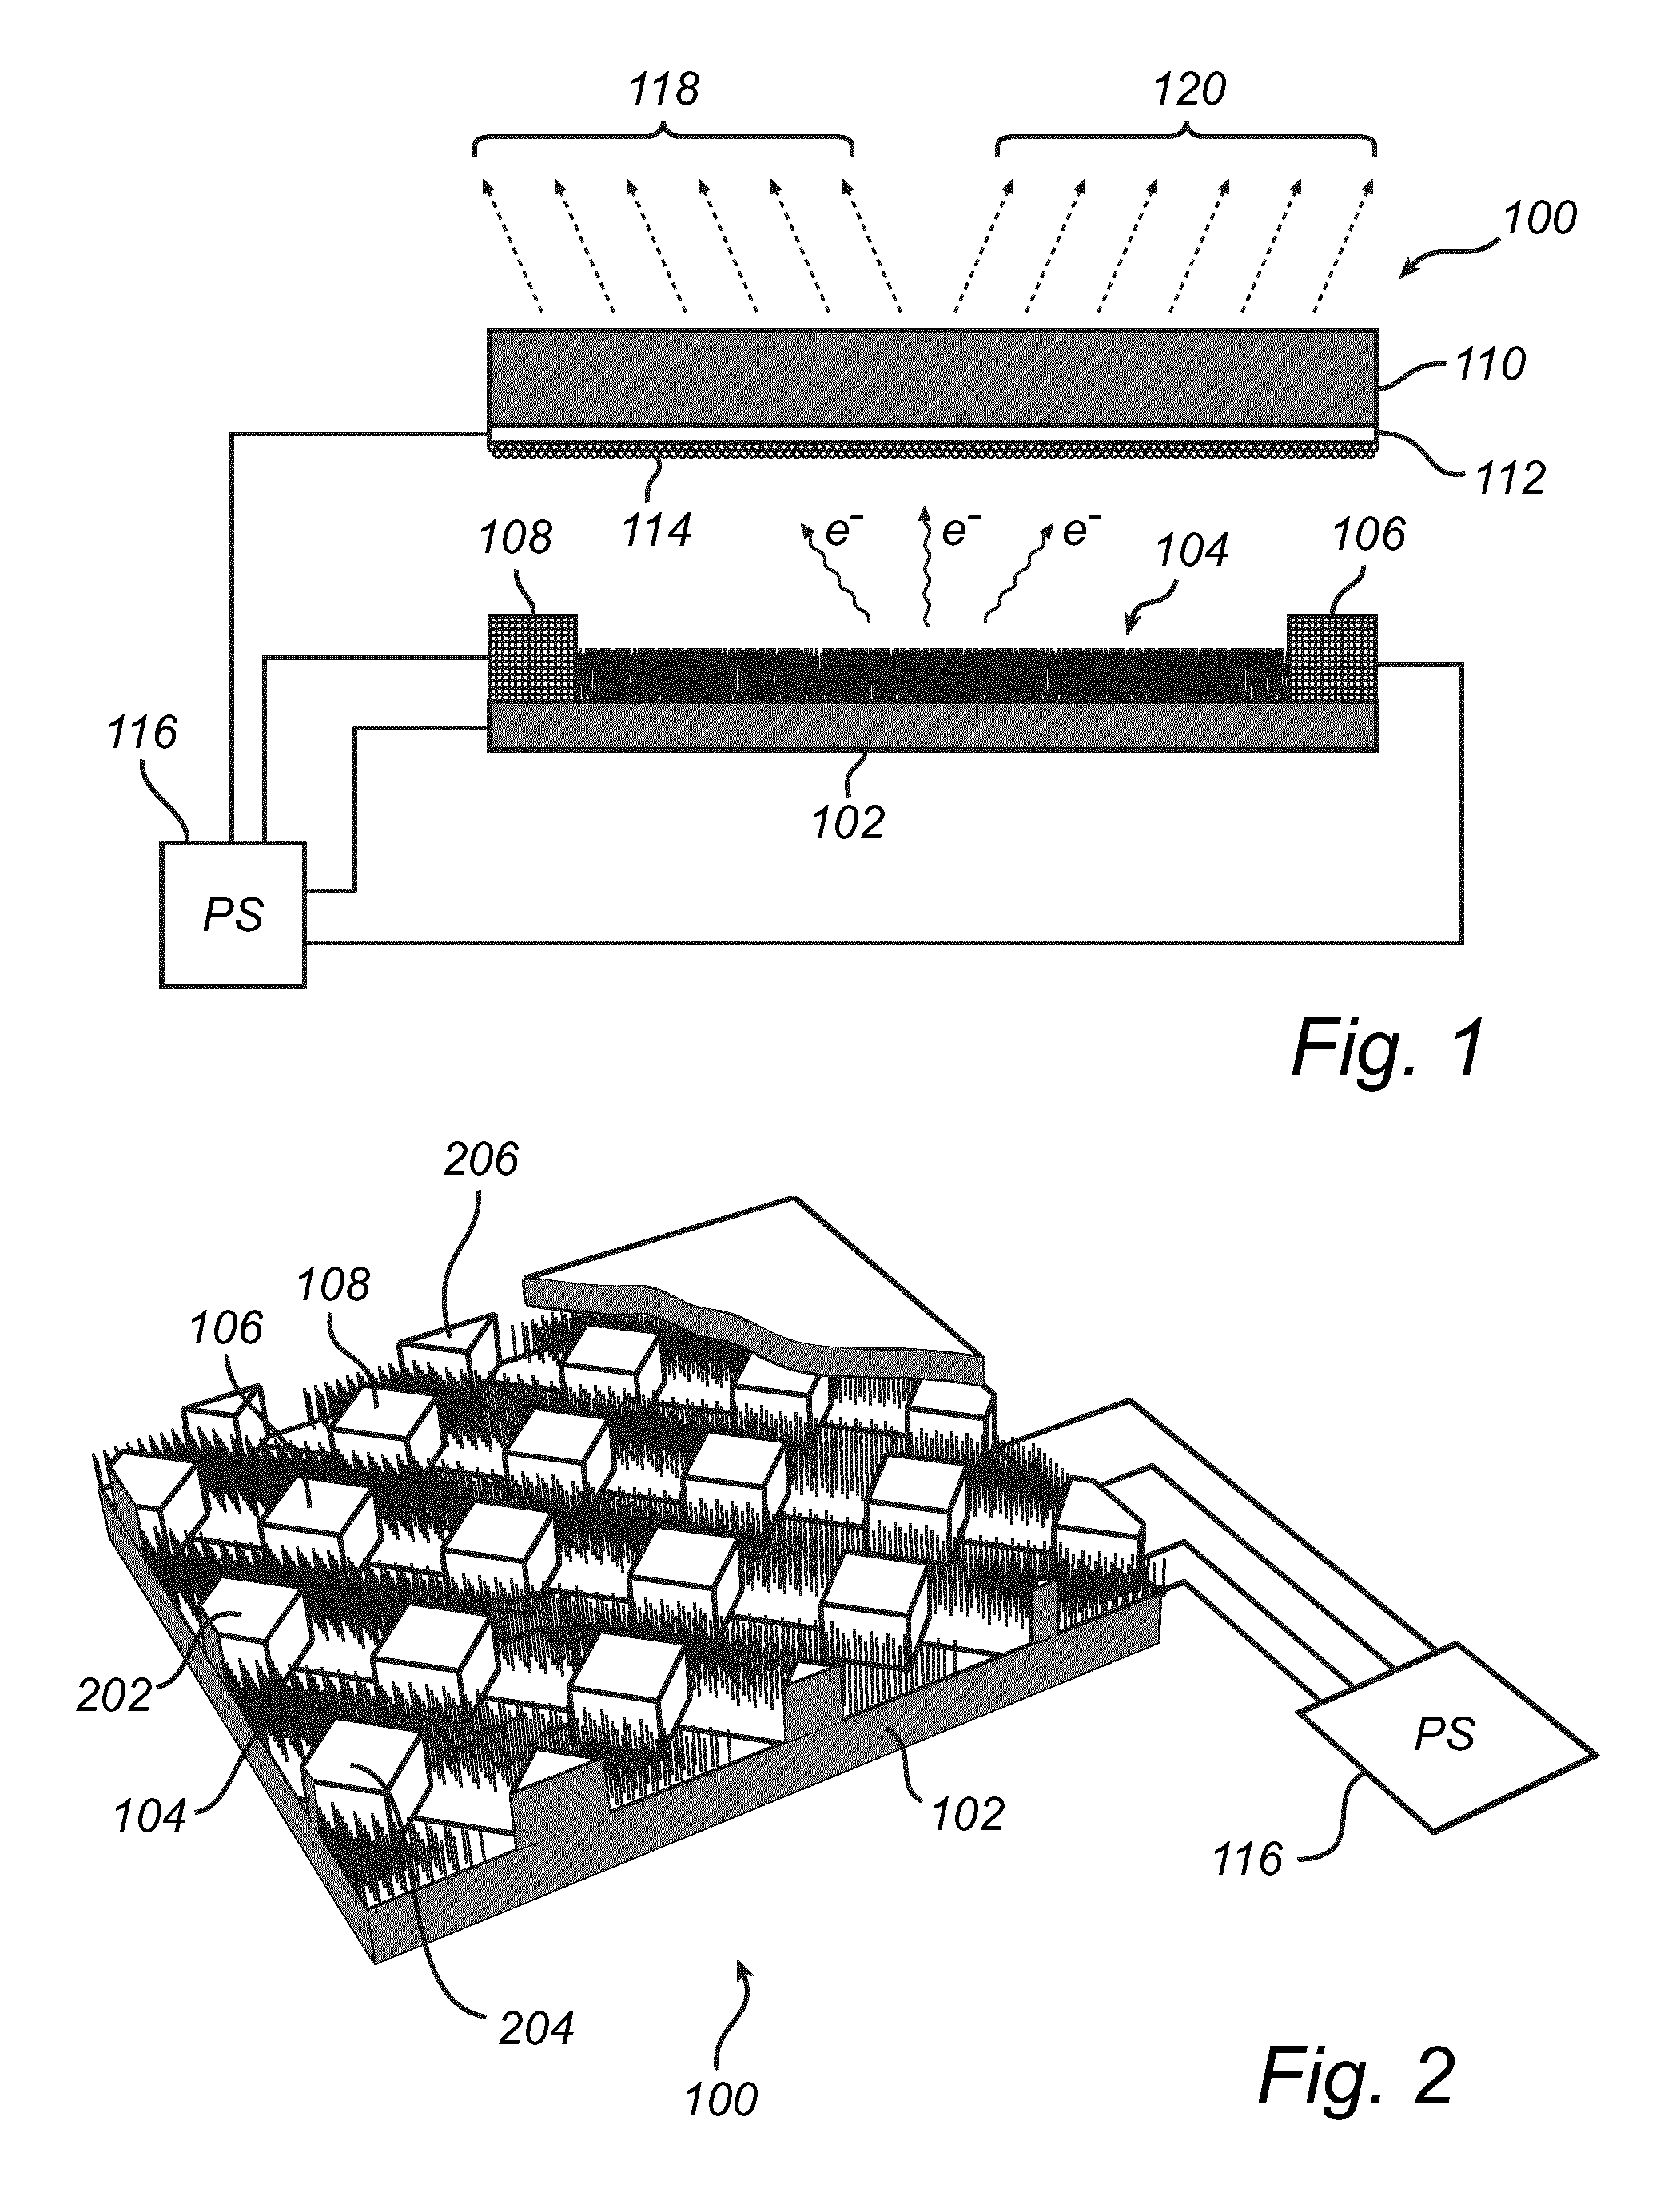 Electrical power control of a field emission lighting system